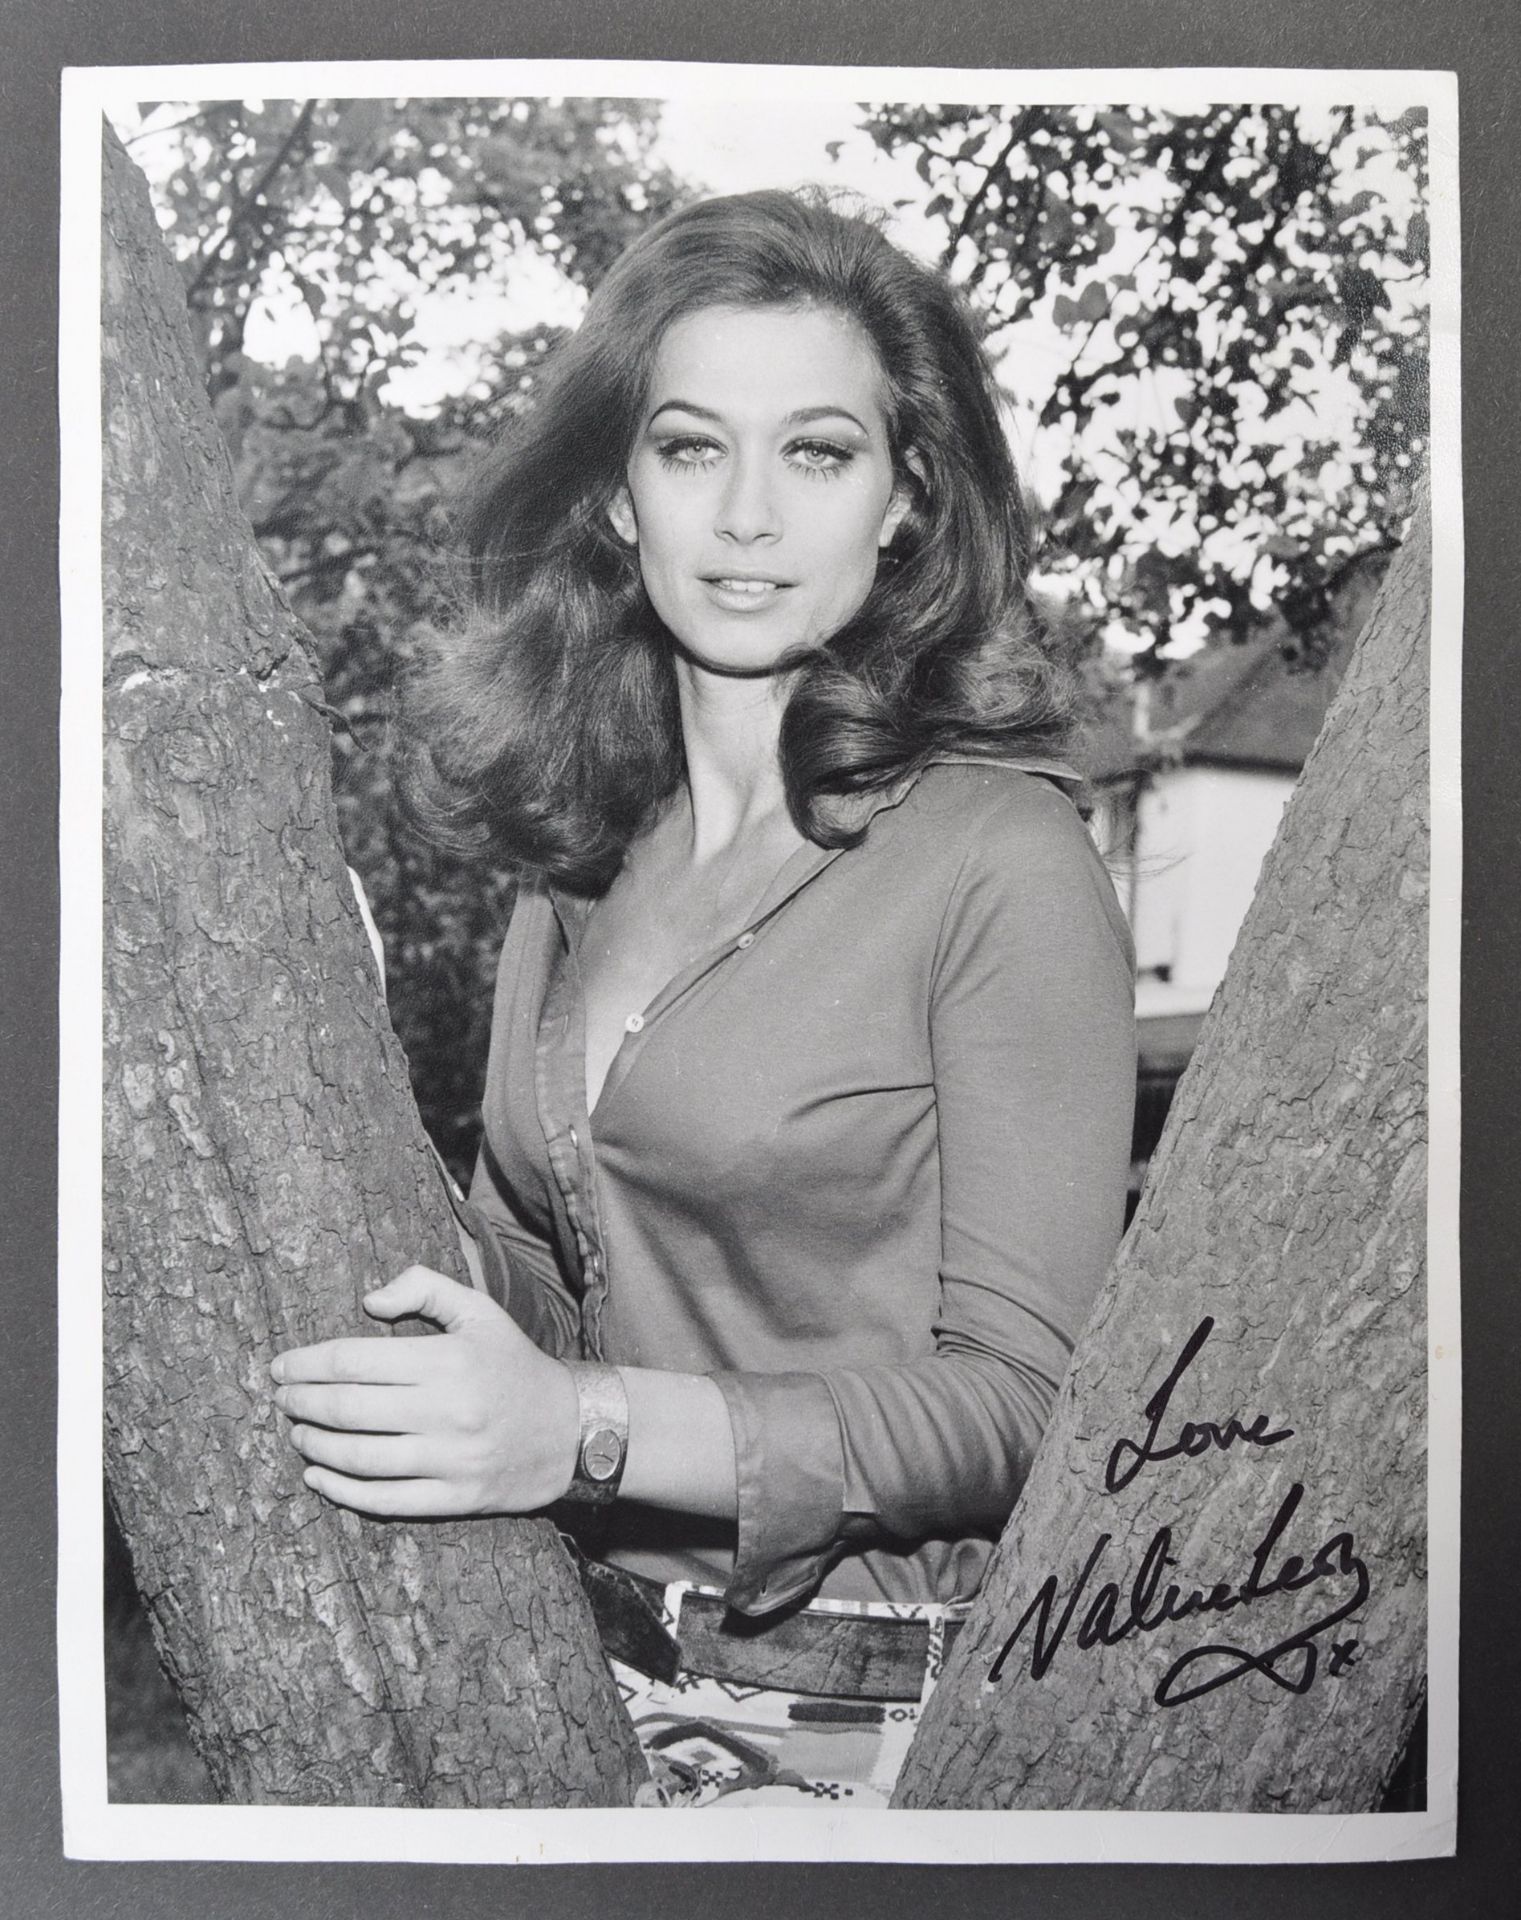 FROM THE COLLECTION OF VALERIE LEON - VINTAGE SIGN